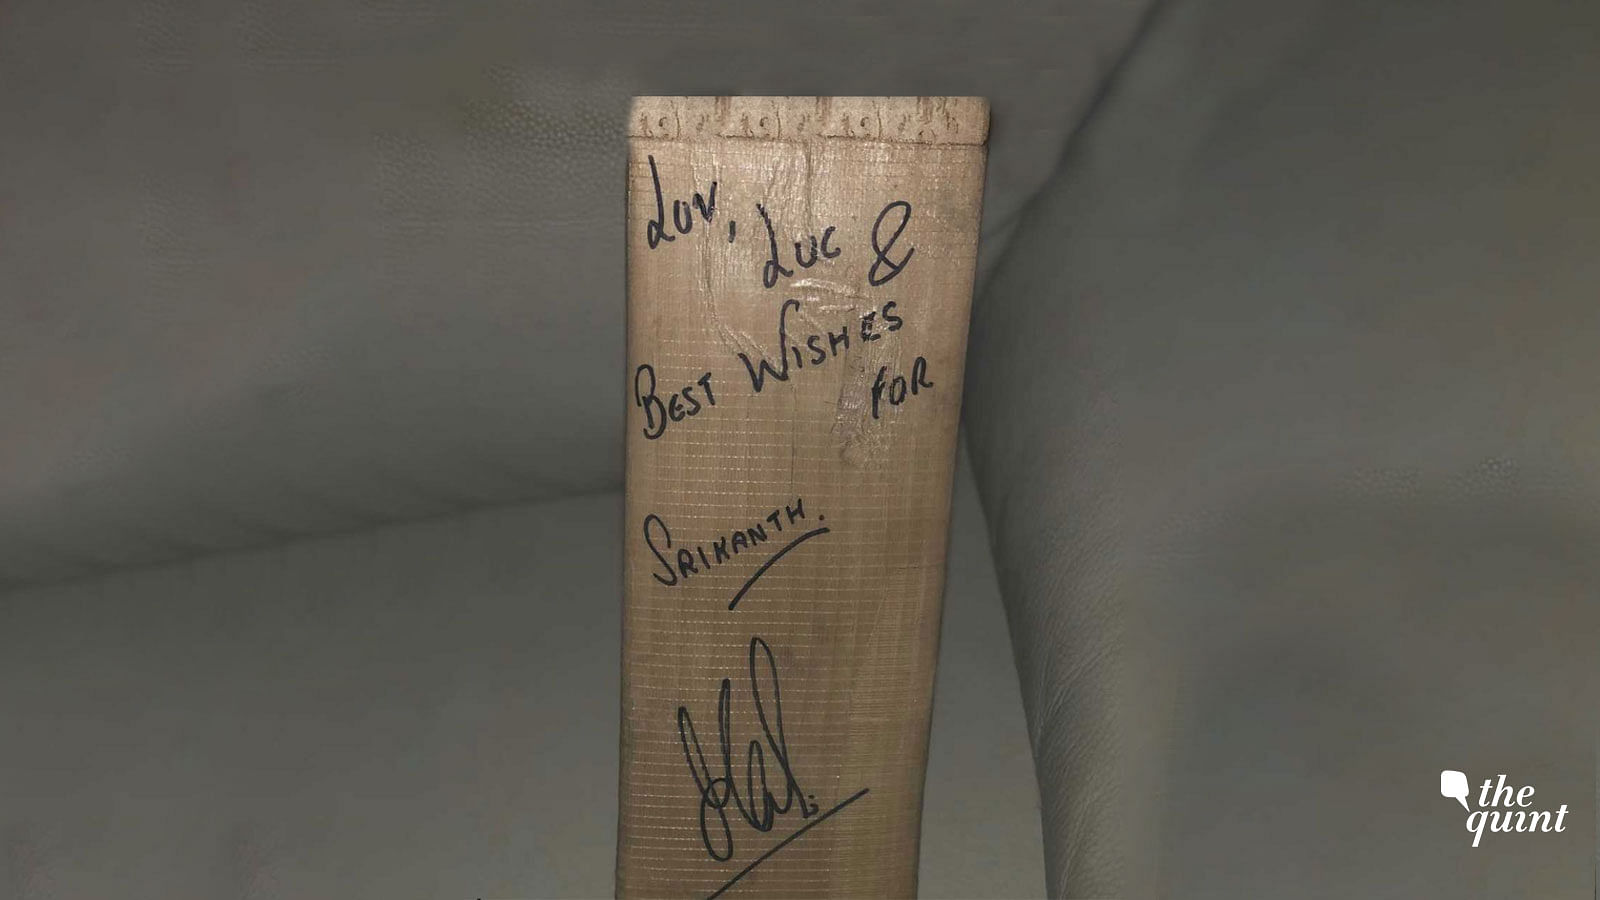 Kidambi Srikanth posted a picture of the bat MS Dhoni gifted him on social media.